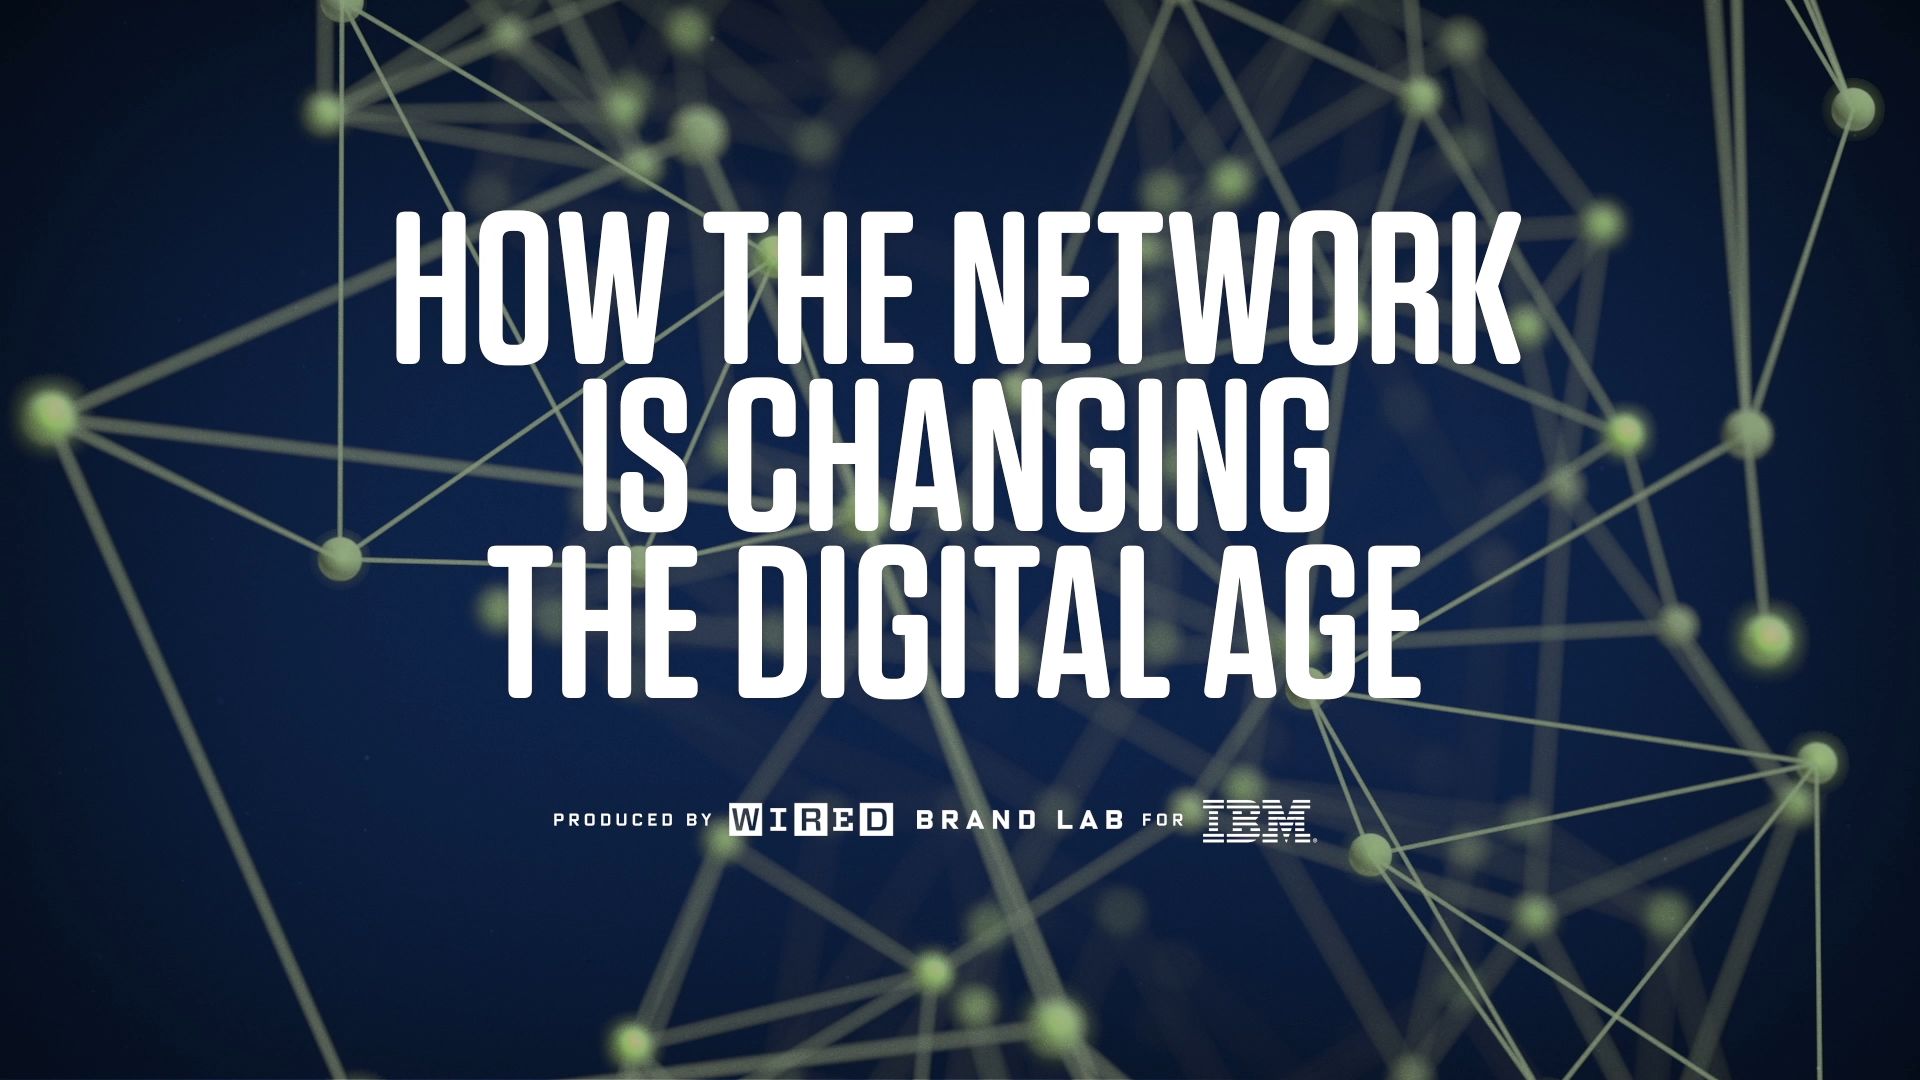 Watch How The Network Is Changing The Digital Age | WIRED Brand Lab | WIRED